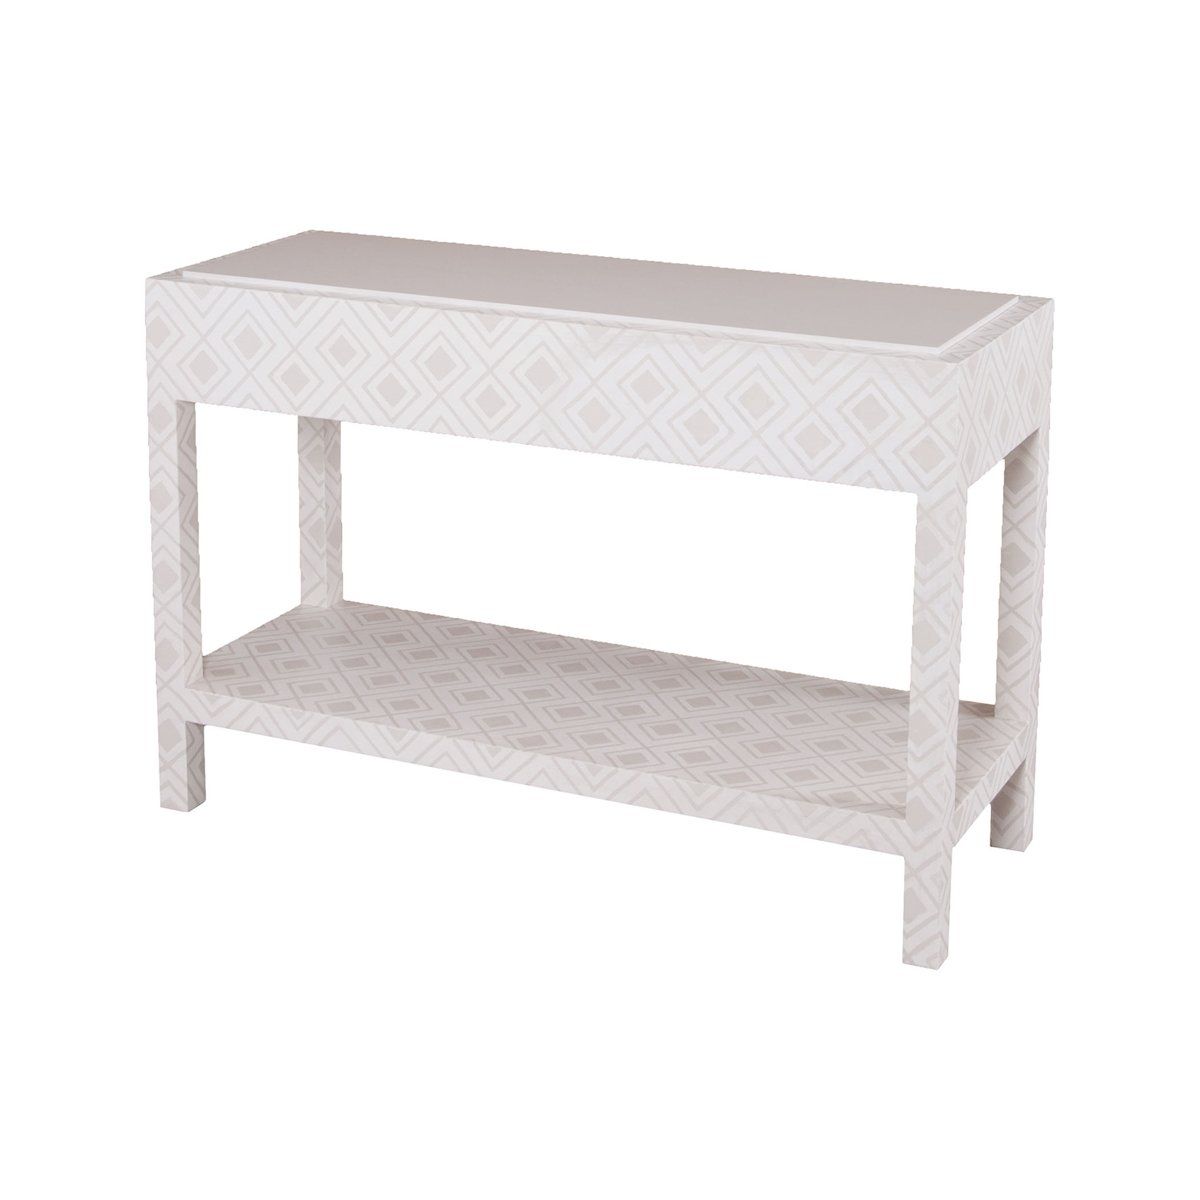 Kent Fabric Wrapped Console | Products In 2018 | Pinterest With Regard To Parsons Clear Glass Top &amp; Dark Steel Base 48x16 Console Tables (View 29 of 30)